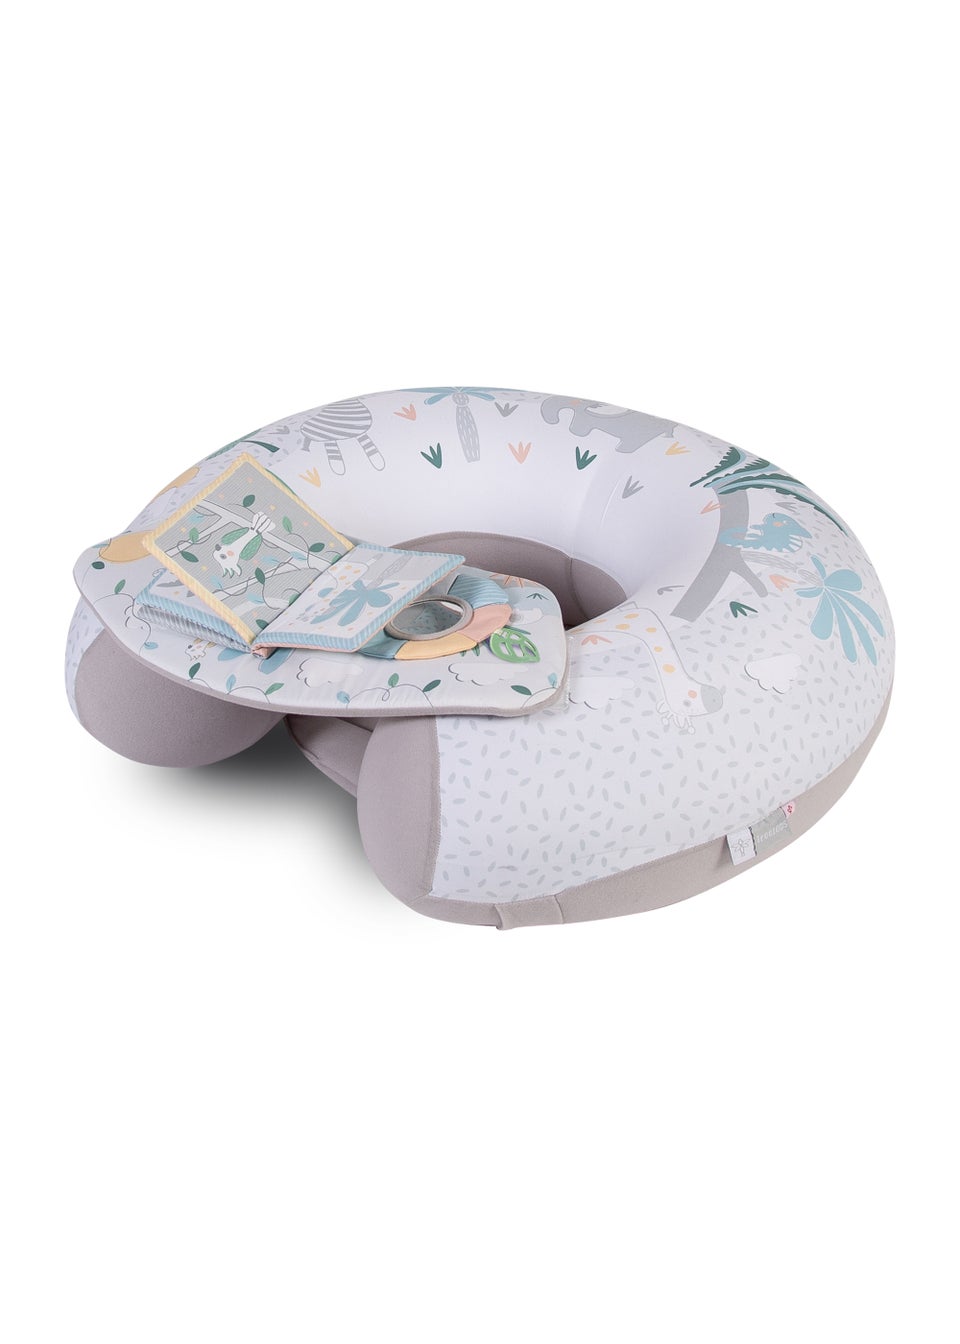 Anti Slip Baby Infant Bath Tub Ring Seat For Infant, Toddler, And Kids Safe  Toy Chair From Gcffu, $36.88 | DHgate.Com